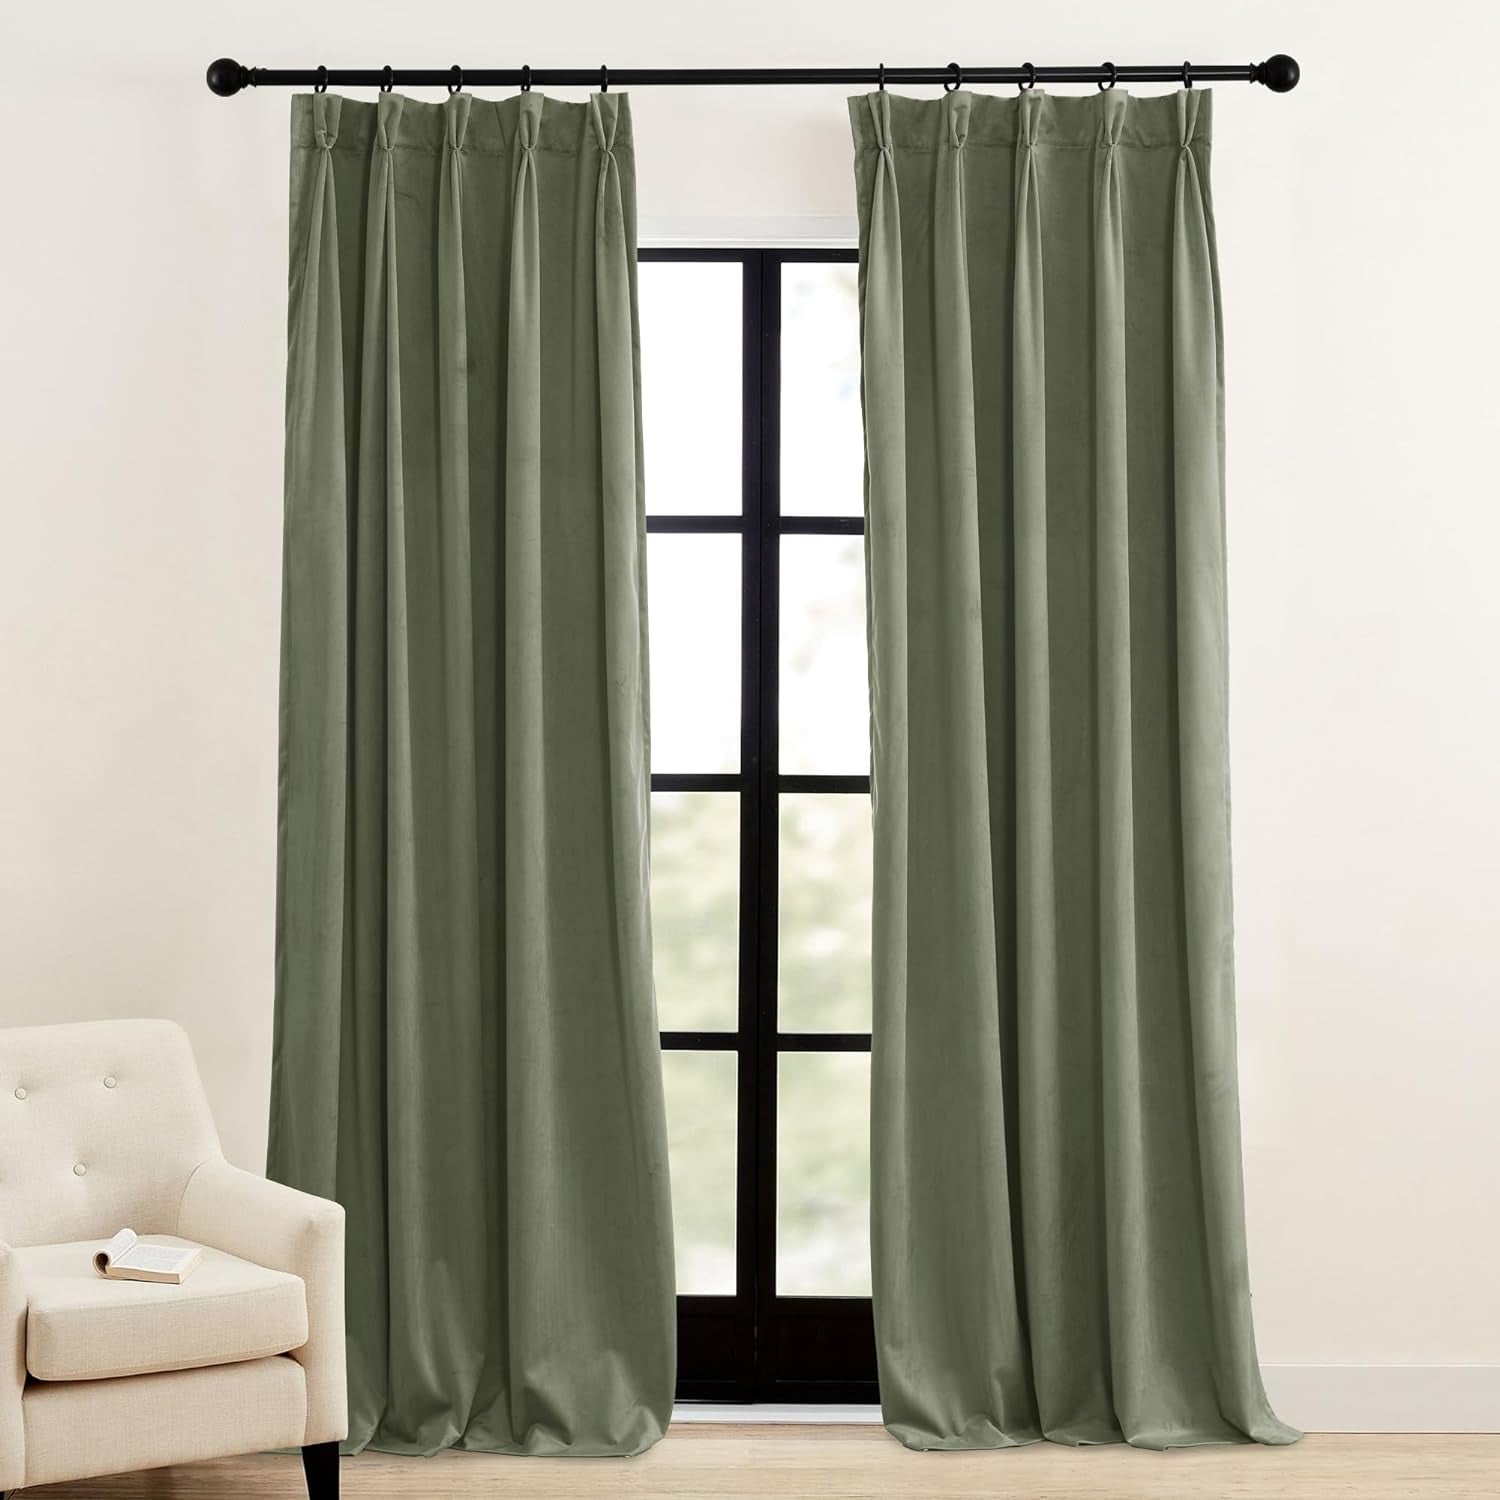 RYB HOME Sage Green Pinch Pleated Velvet Curtains 96 Inches, Hook Rings & Back Tab Thermal Insulated Room Darkening Pleated Drapes for Bedroom Living Room, W34 X L96 Inches, 2 Panels  RYB HOME   